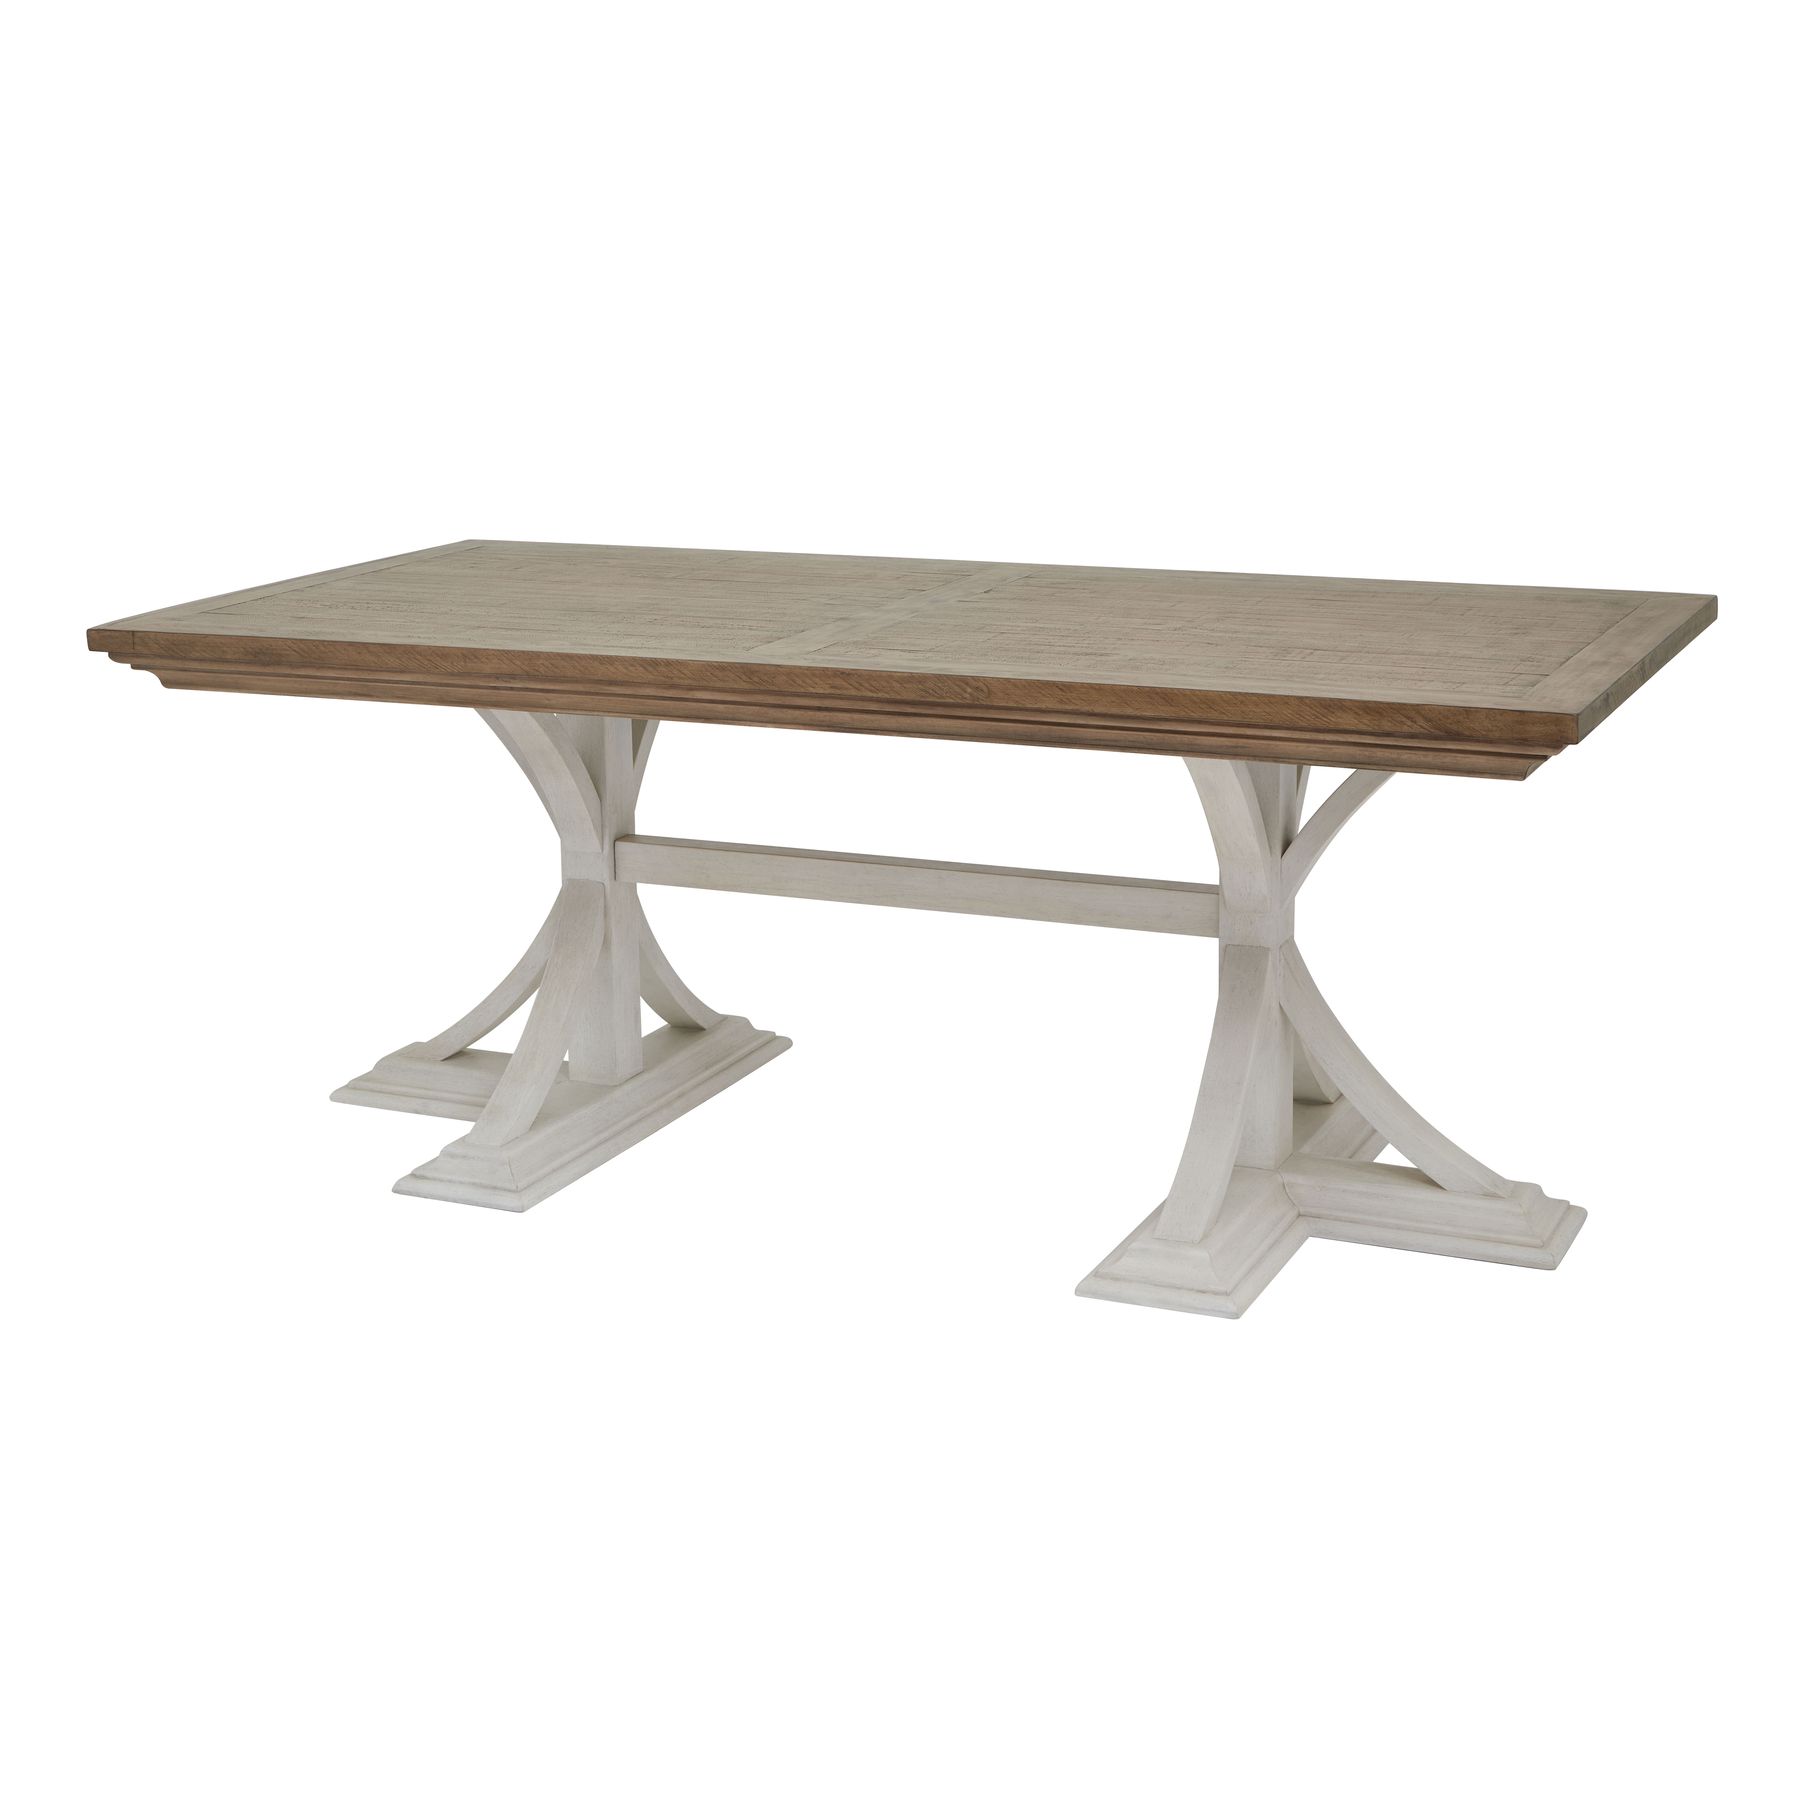 Luna Collection Rectangular Dining Table - Image 1